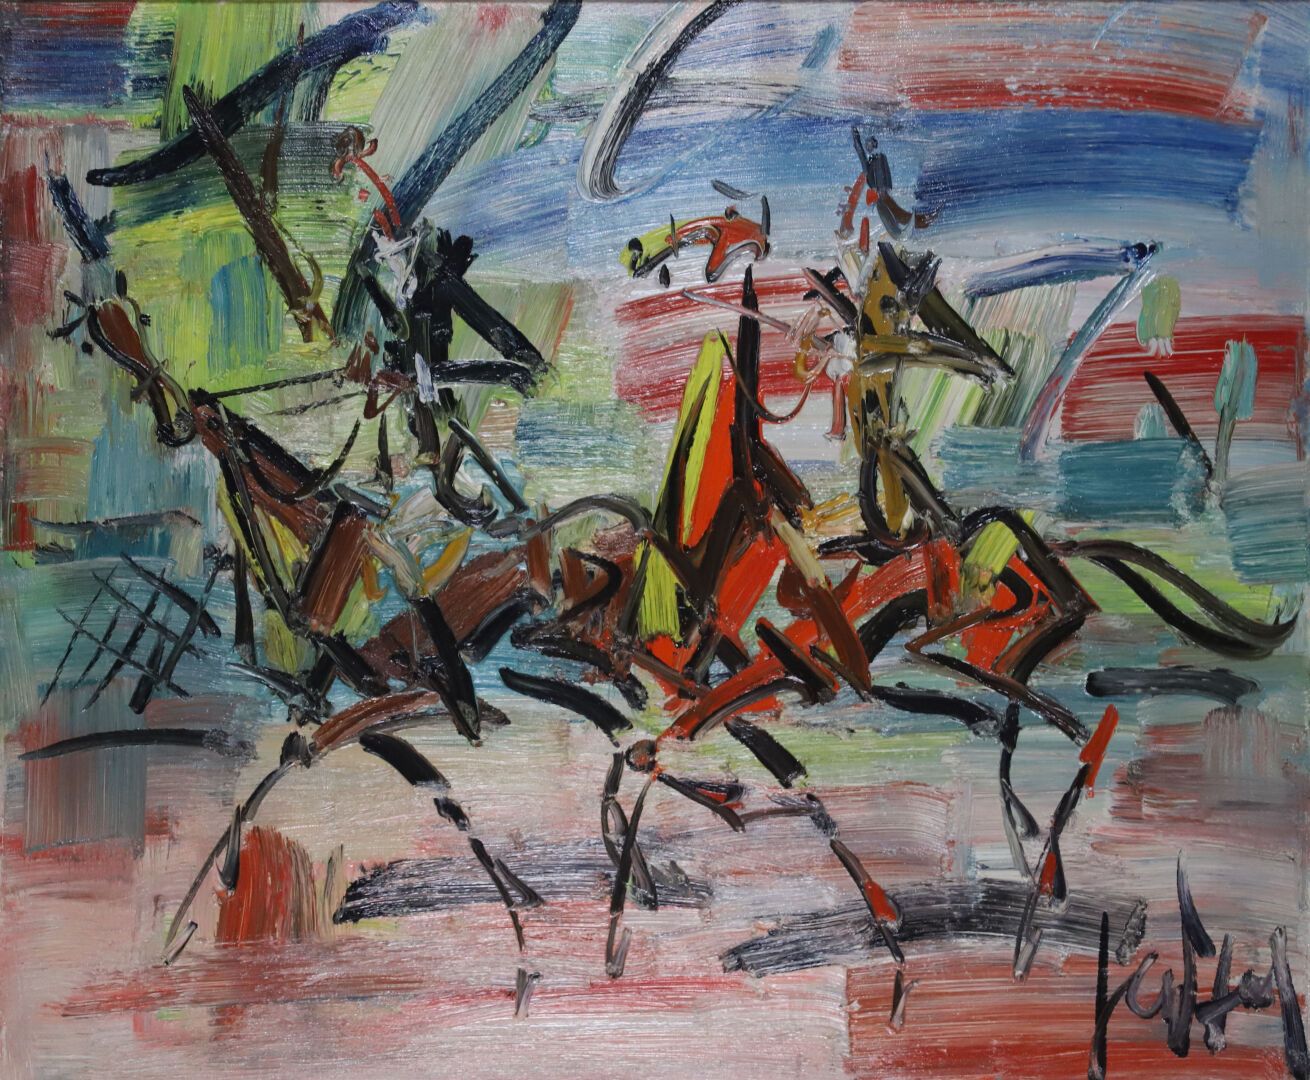 Null GEN PAUL (1895-1975)
The riders
Oil on canvas signed lower right
46 x 55 cm&hellip;